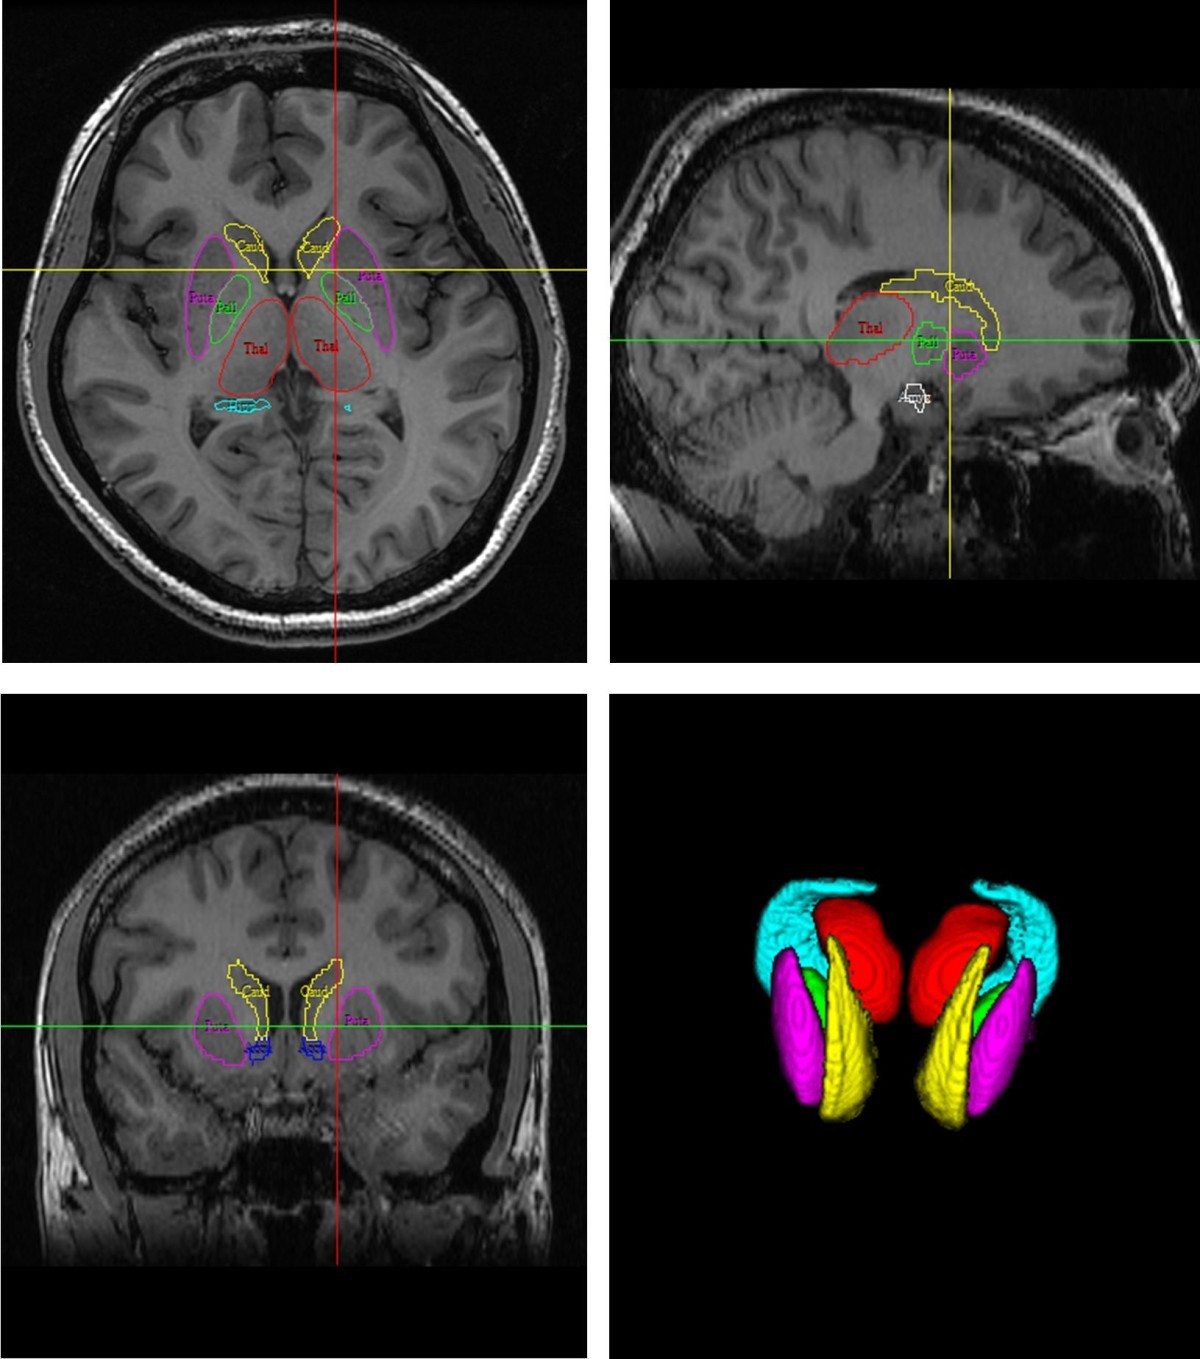 Evaluation of subcortical grey matter abnormalities in patients with